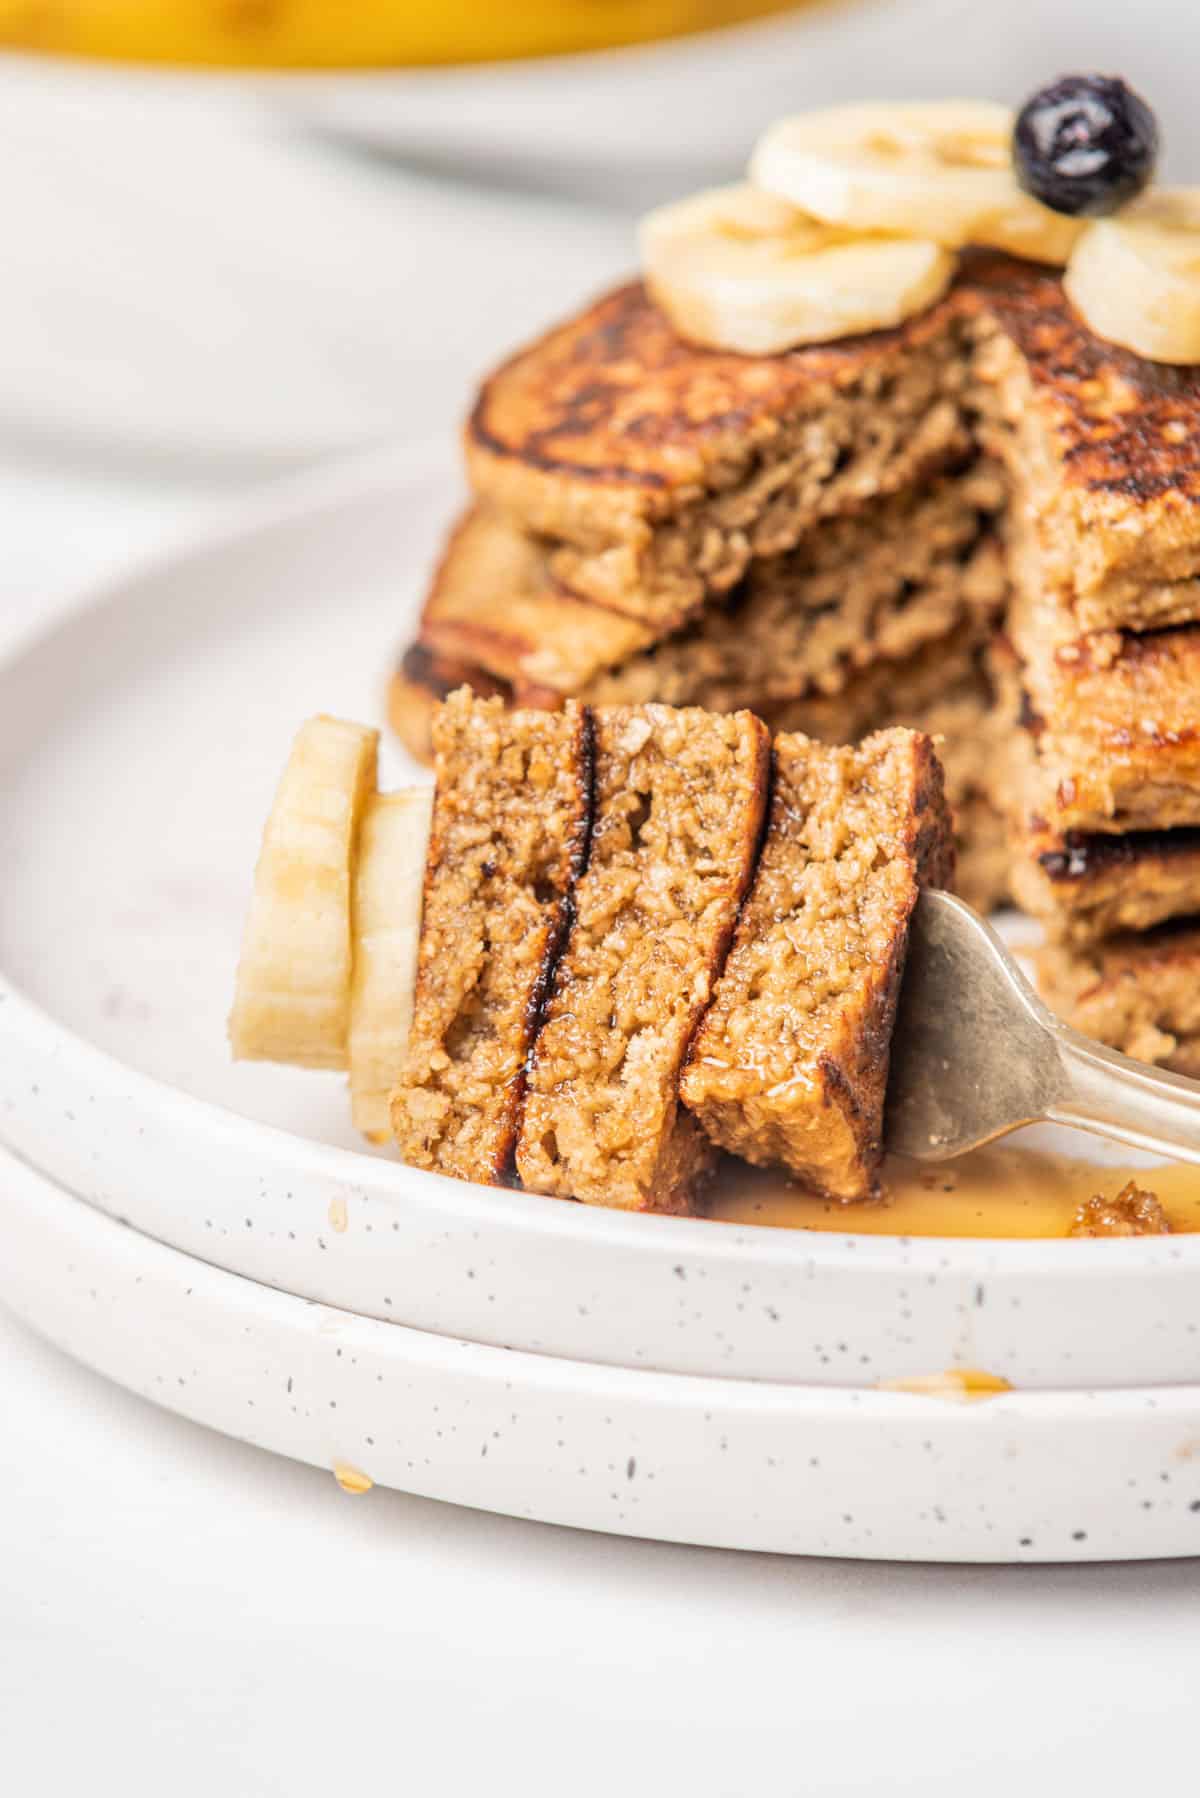 Banana oat pancakes in a stack on a white plate.